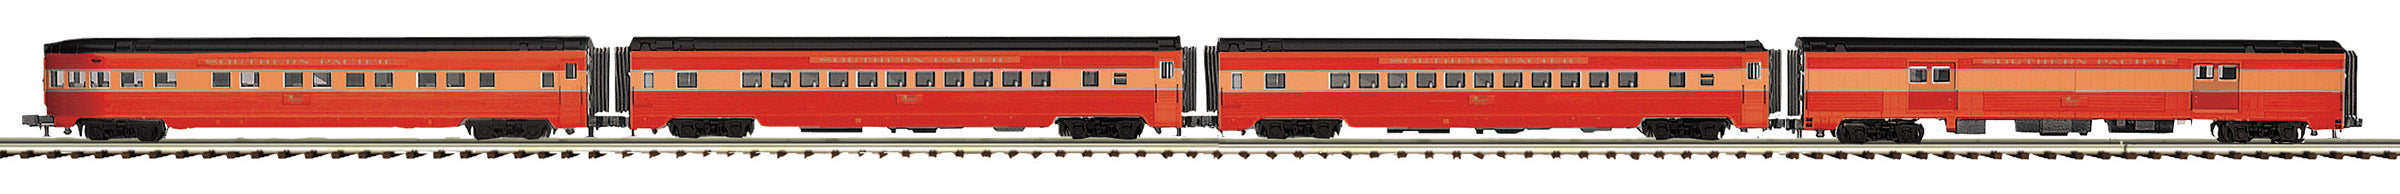 MTH 20-64237 - 70’ Streamlined Passenger Set "Southern Pacific" (Daylight) Smooth Sided (4-Car)